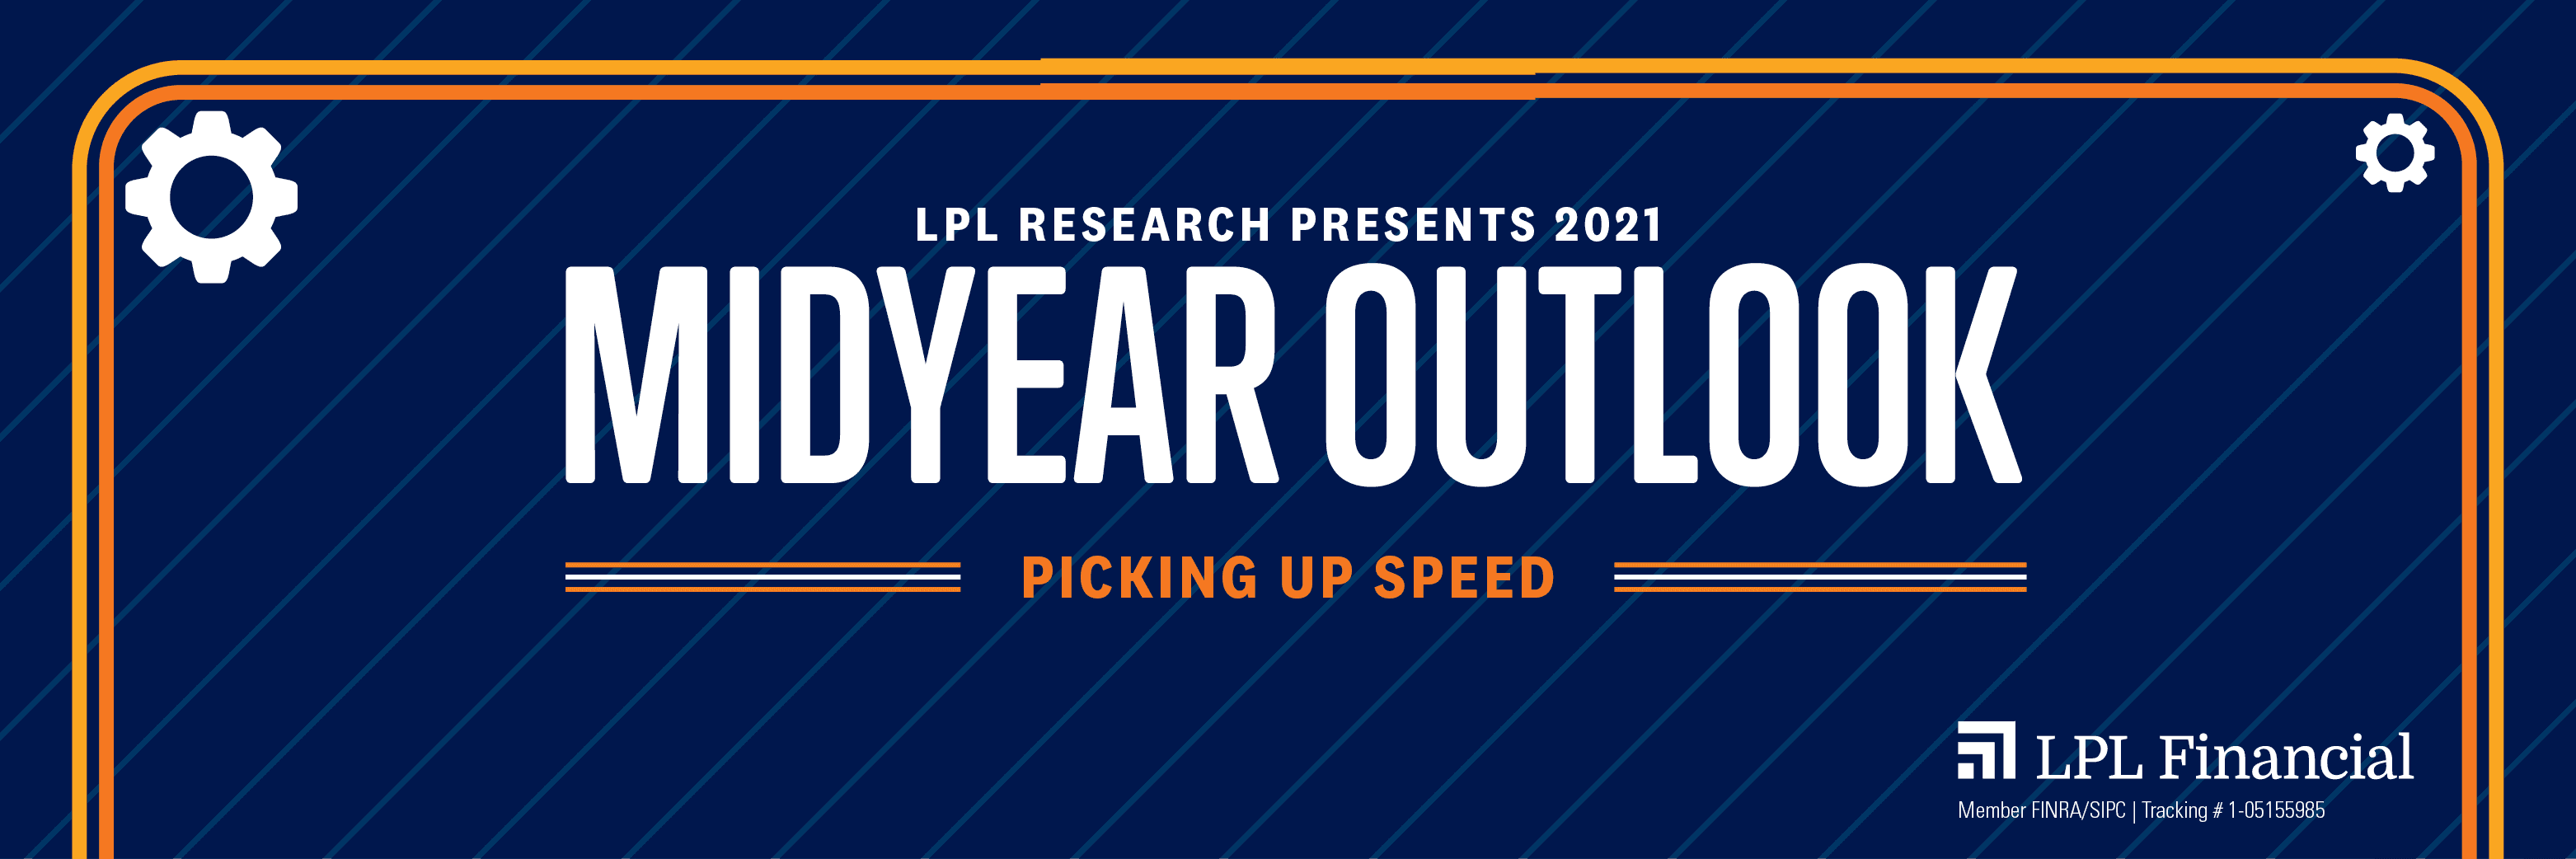 LPL's Mid-Year Outlook 2021: Picking Up Speed